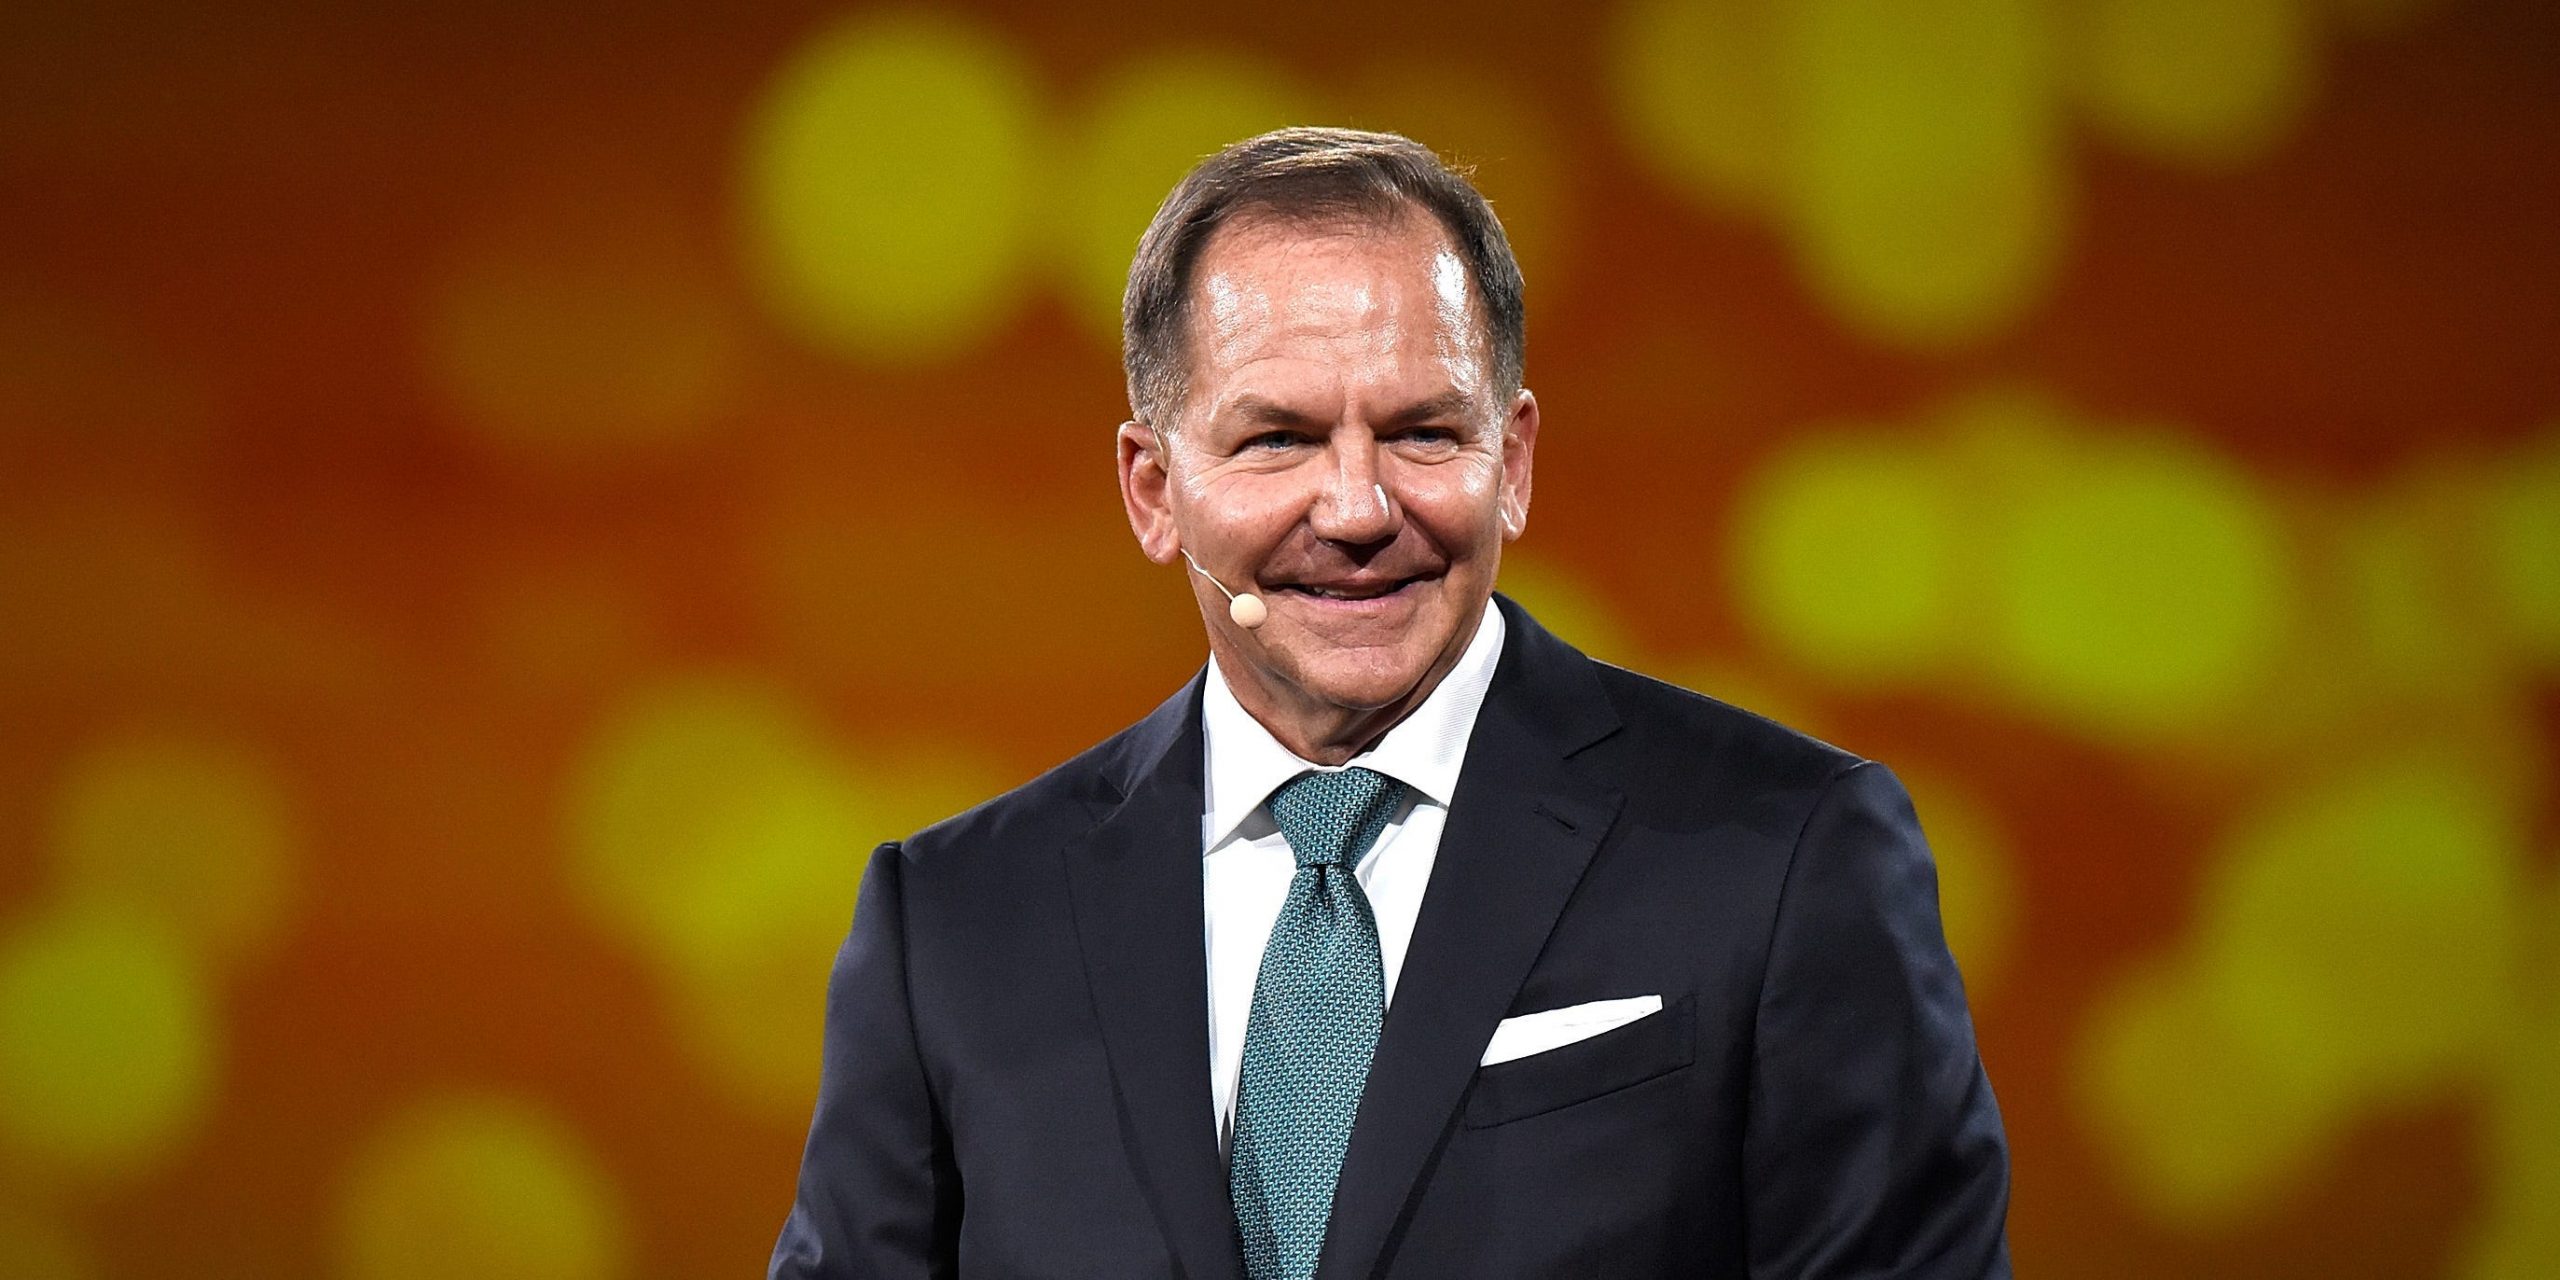 Stocks will see a big surge in the 1st quarter of 2021 after stimulus passes, forecasts billionaire investor Paul Tudor Jones | Markets – Business Insider